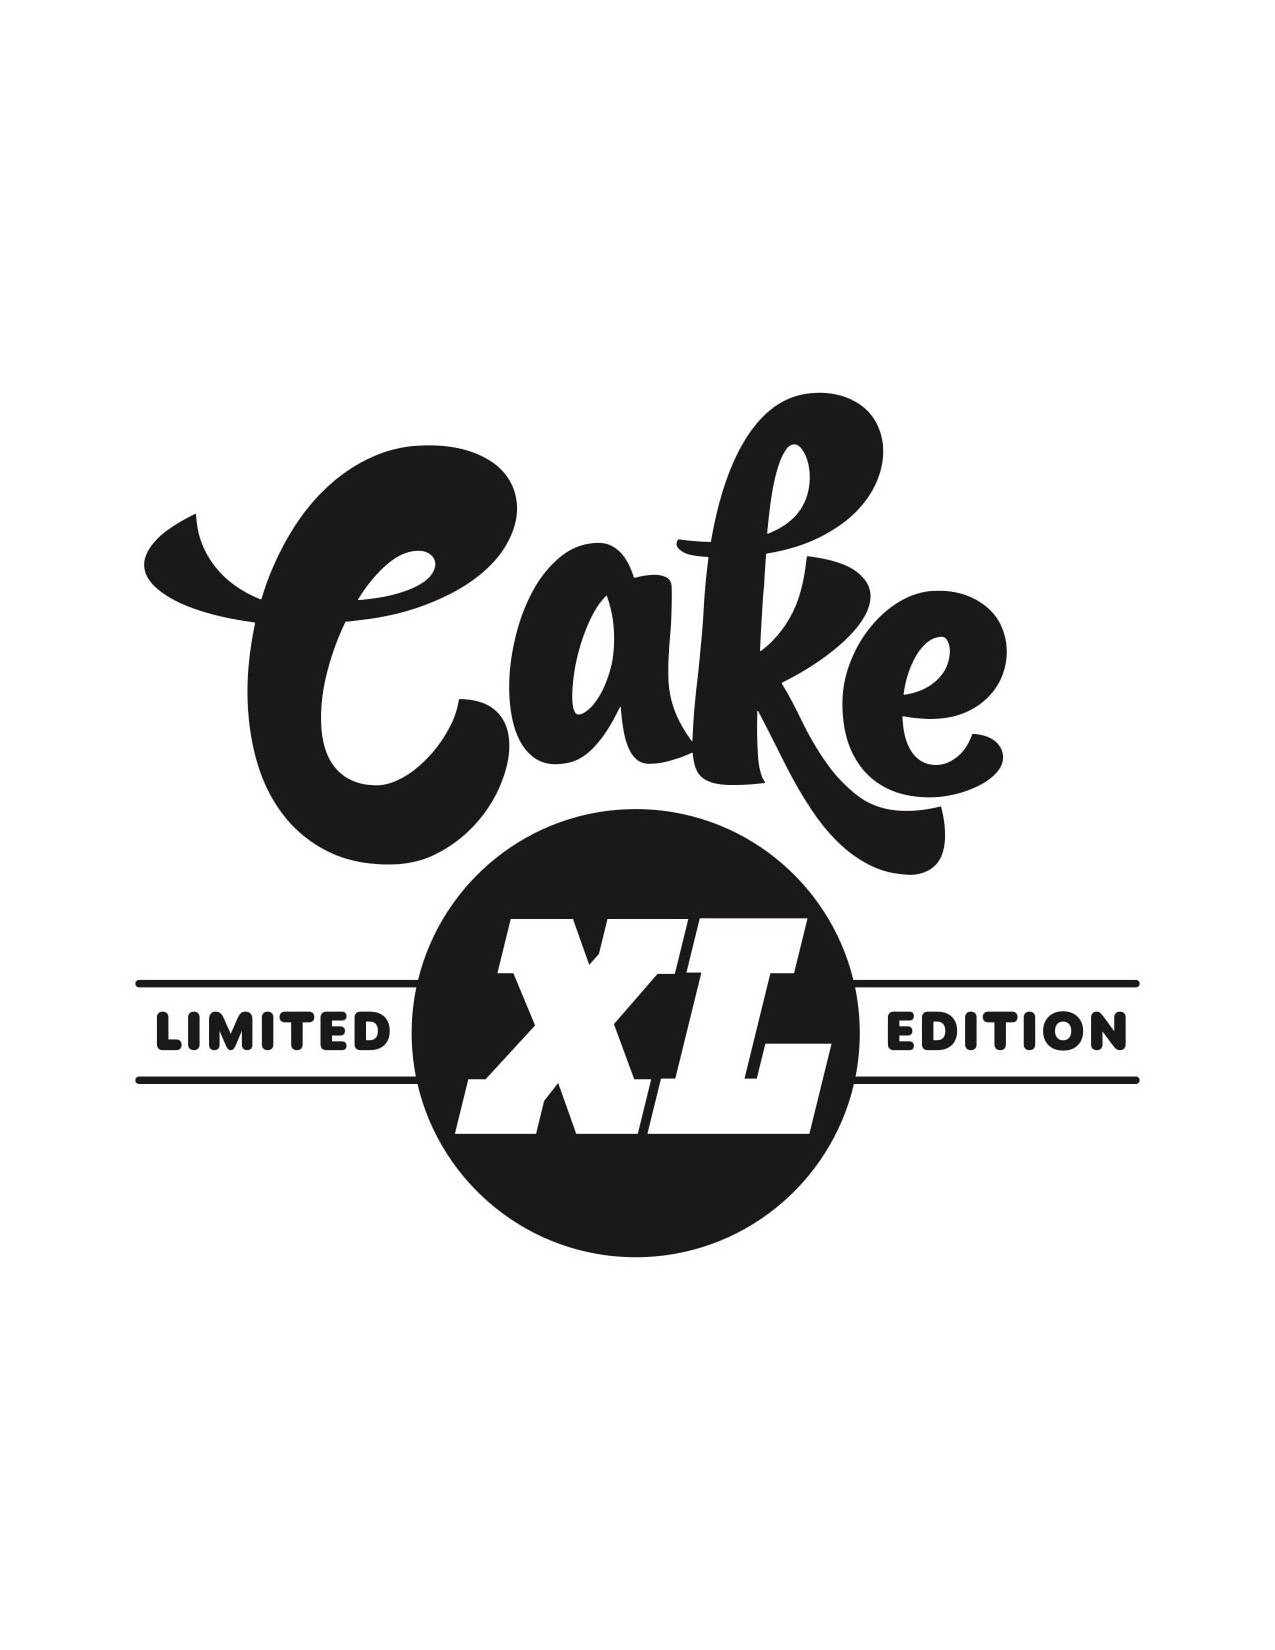  CAKE XL LIMITED EDITION